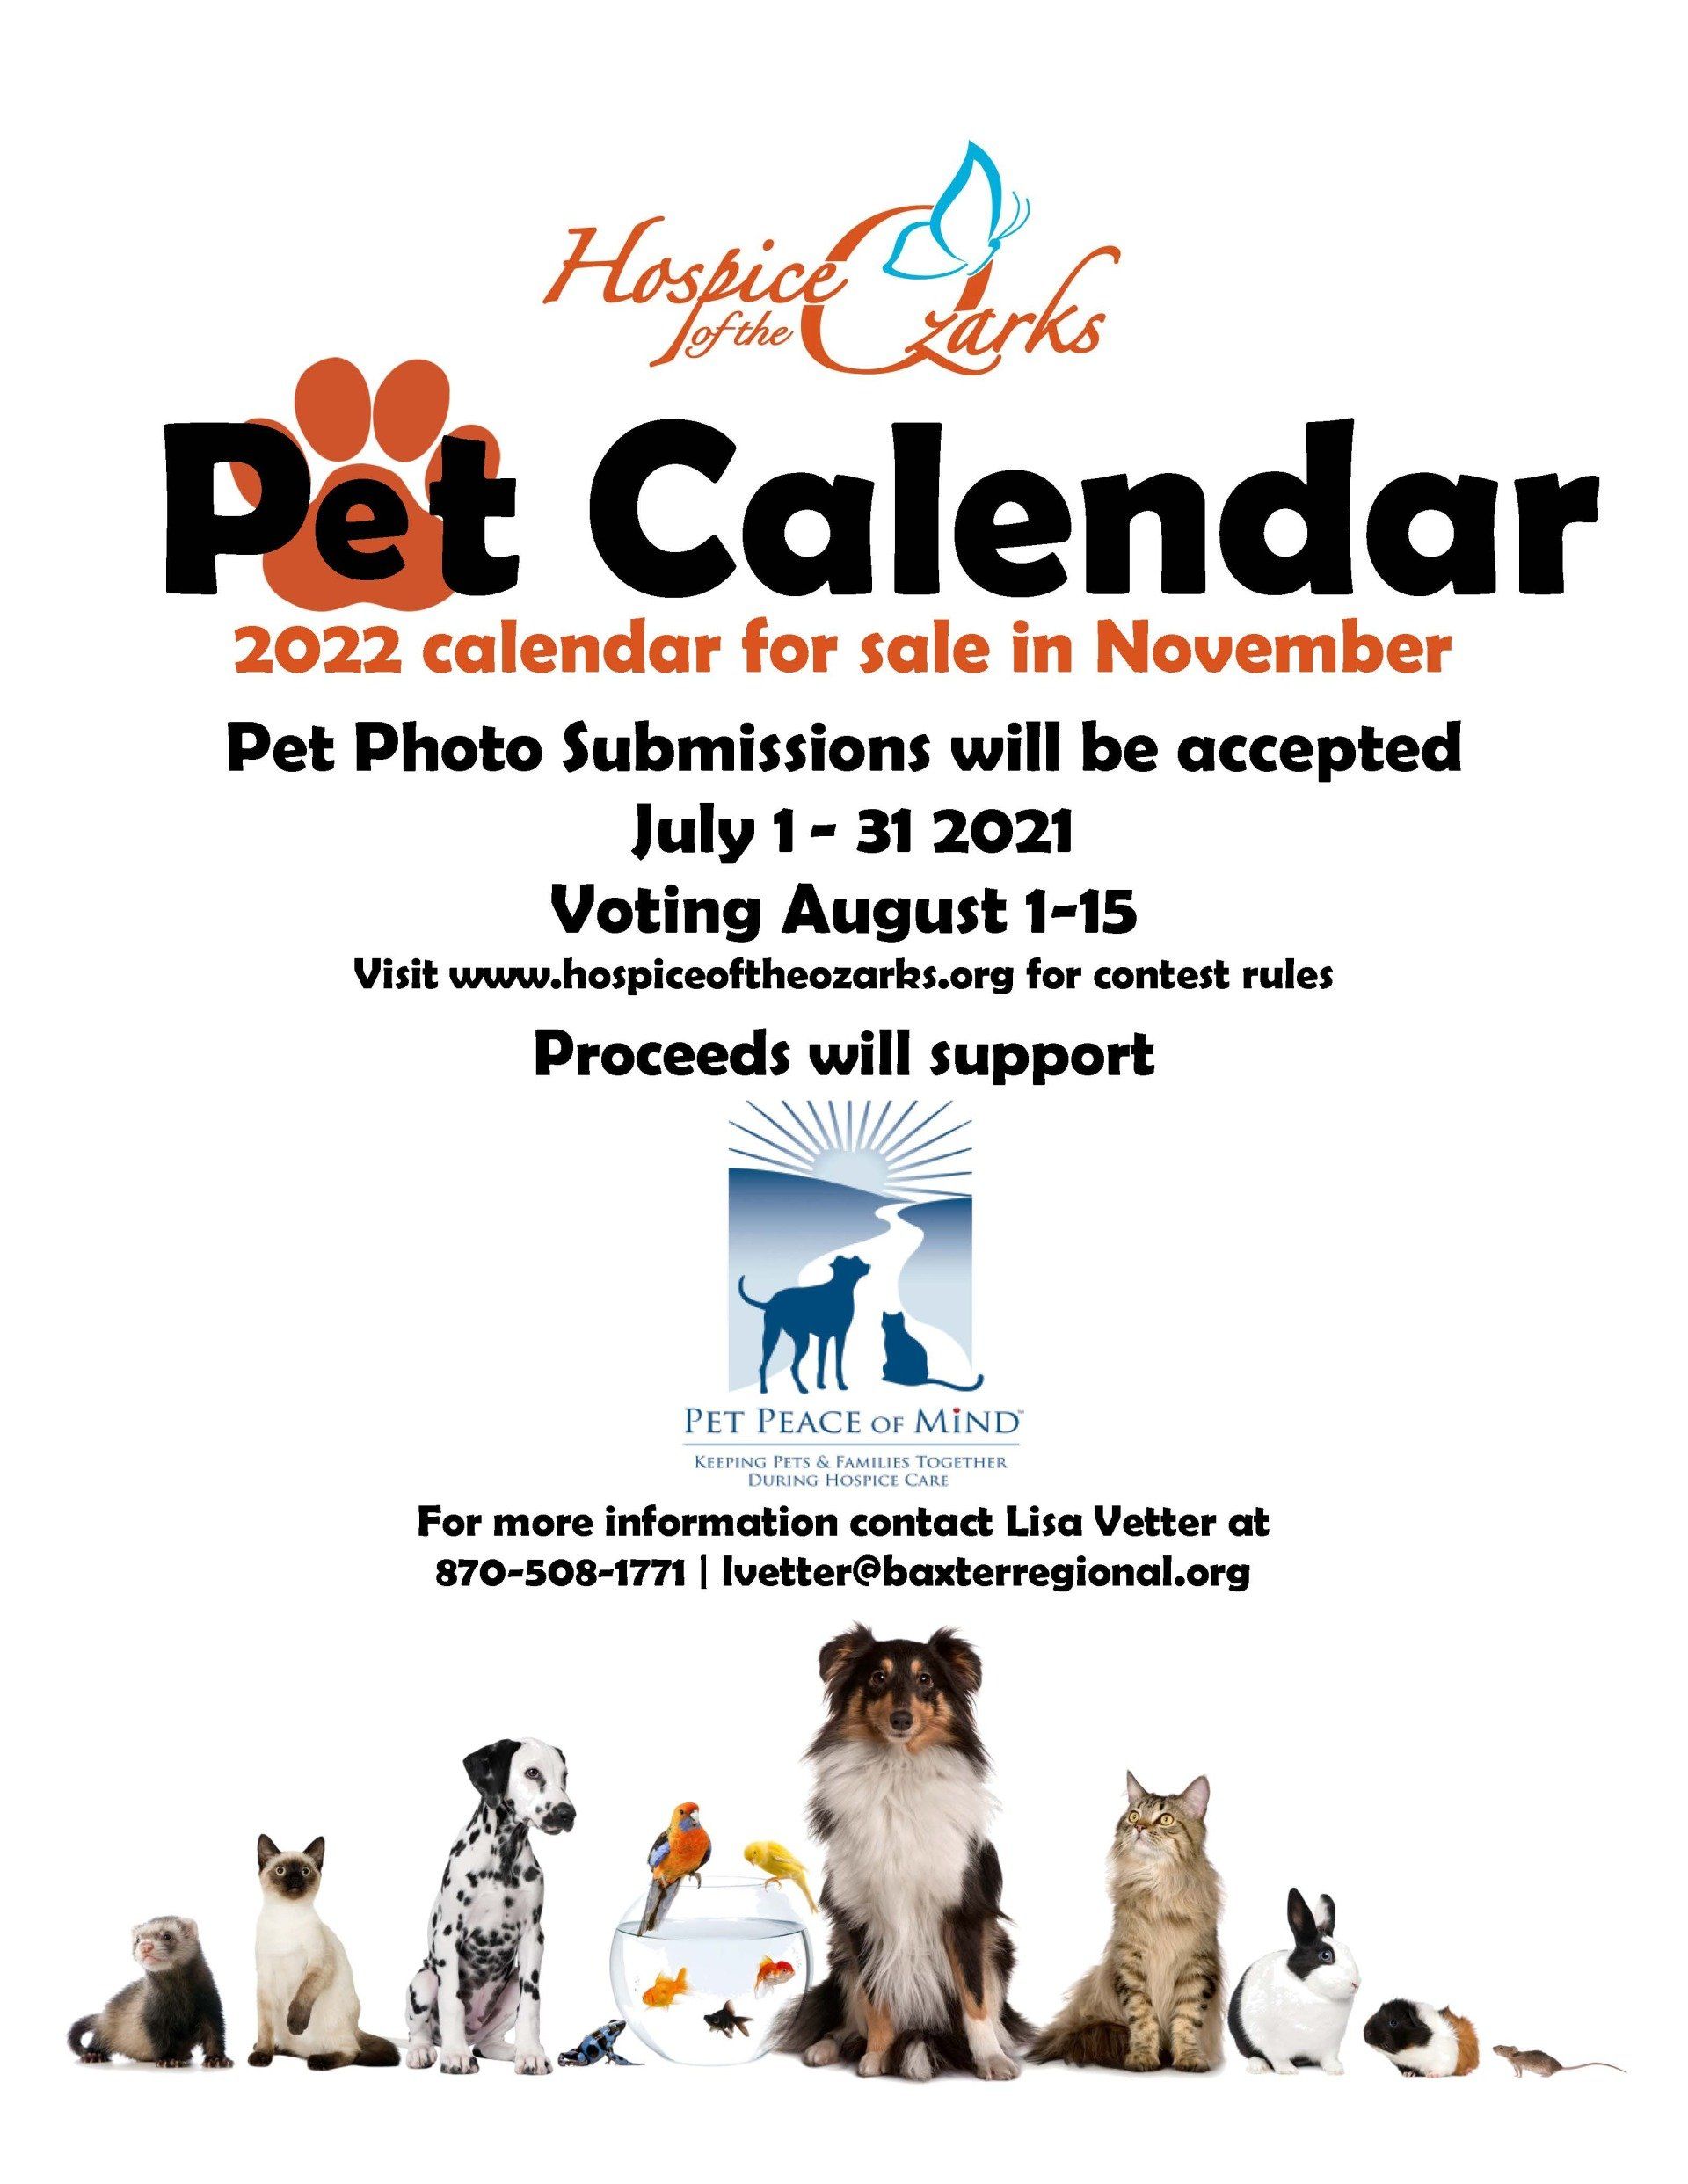 pet-prayers-funny-pleas-and-praise-from-our-animal-friends-2020-wall-calendar-12-month